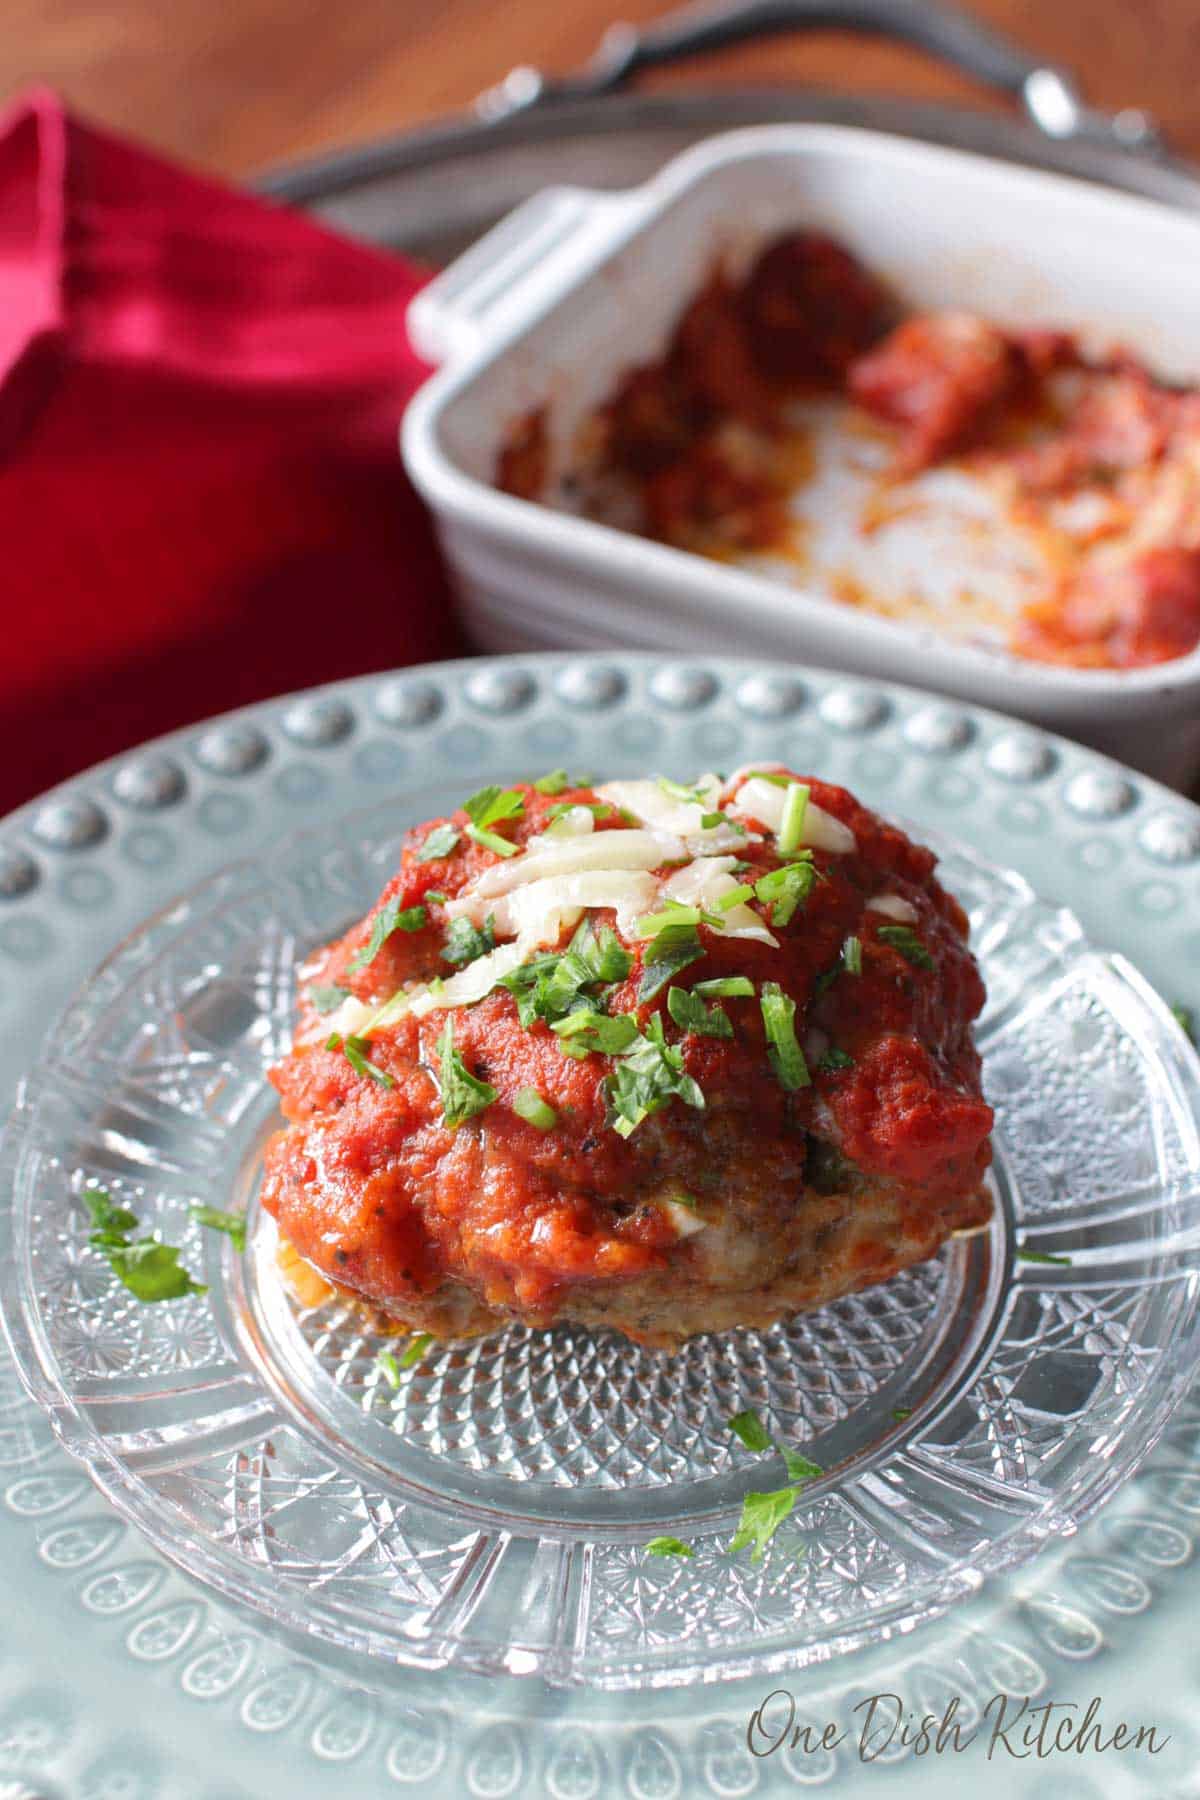 One Italian meatball on a plate topped with tomato sauce and melted parmesan cheese with a baking dish in the background.